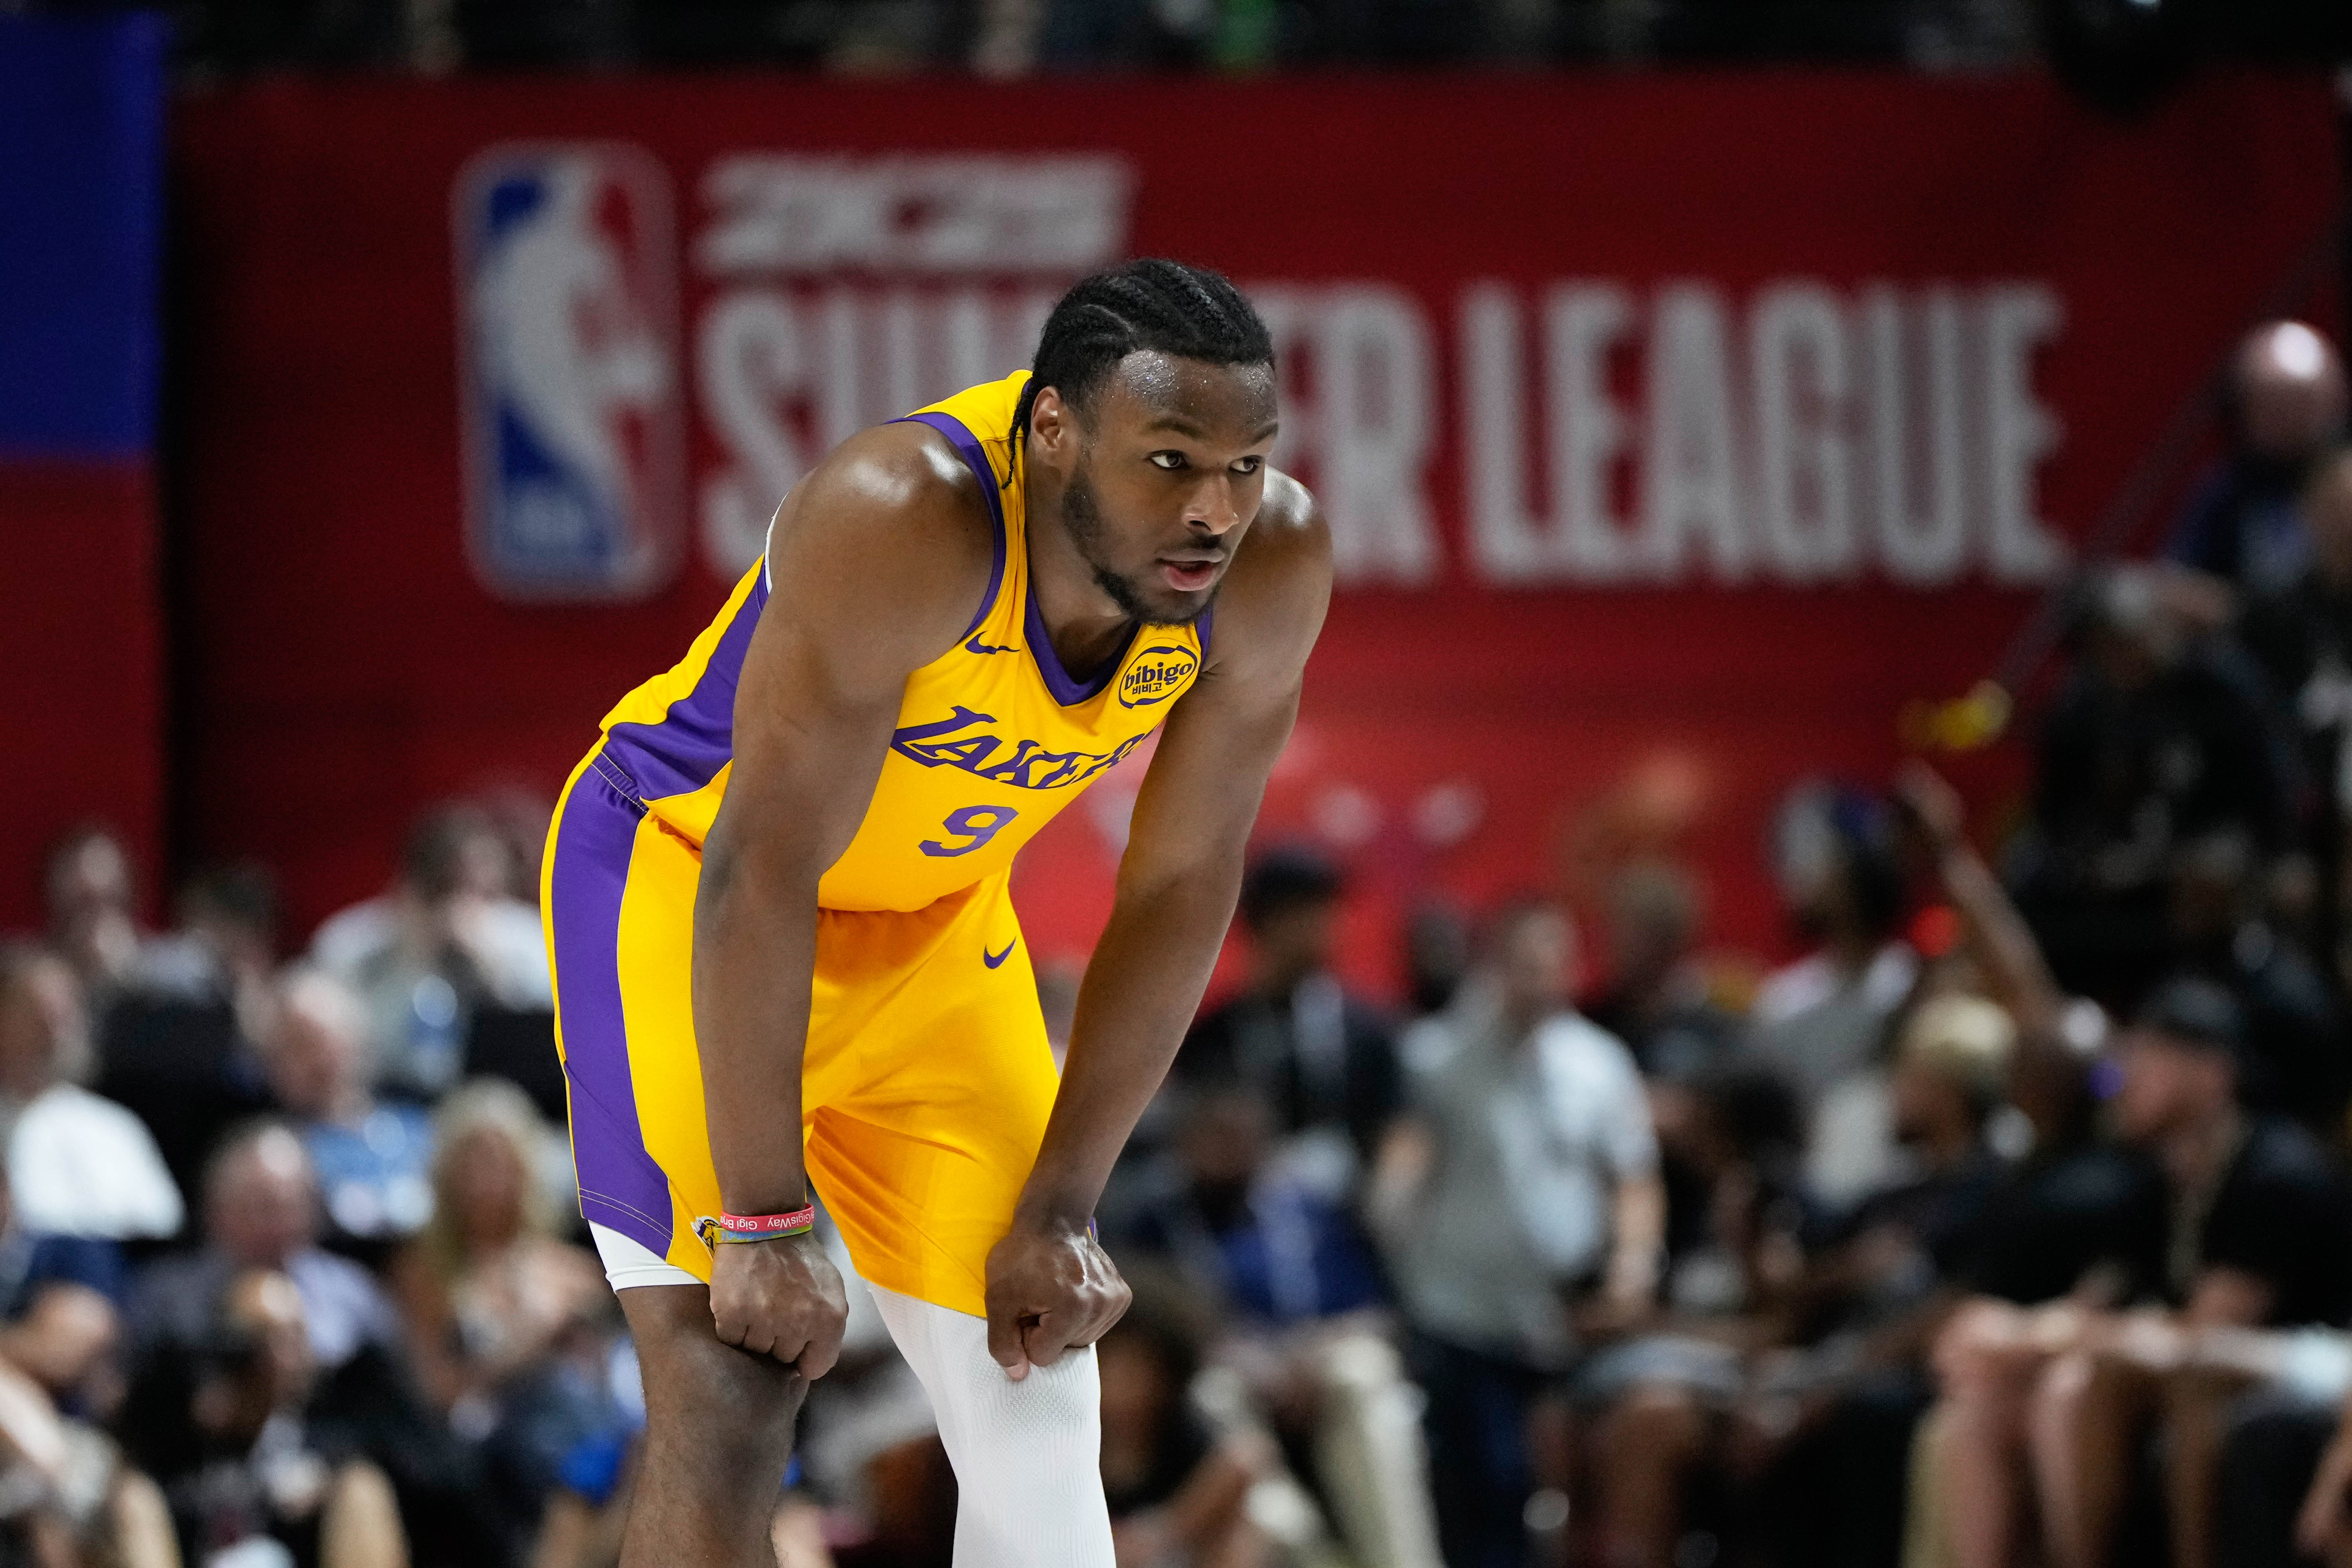 Lakers vs. Cavaliers live updates: See Bronny James' stats tonight against Cavs